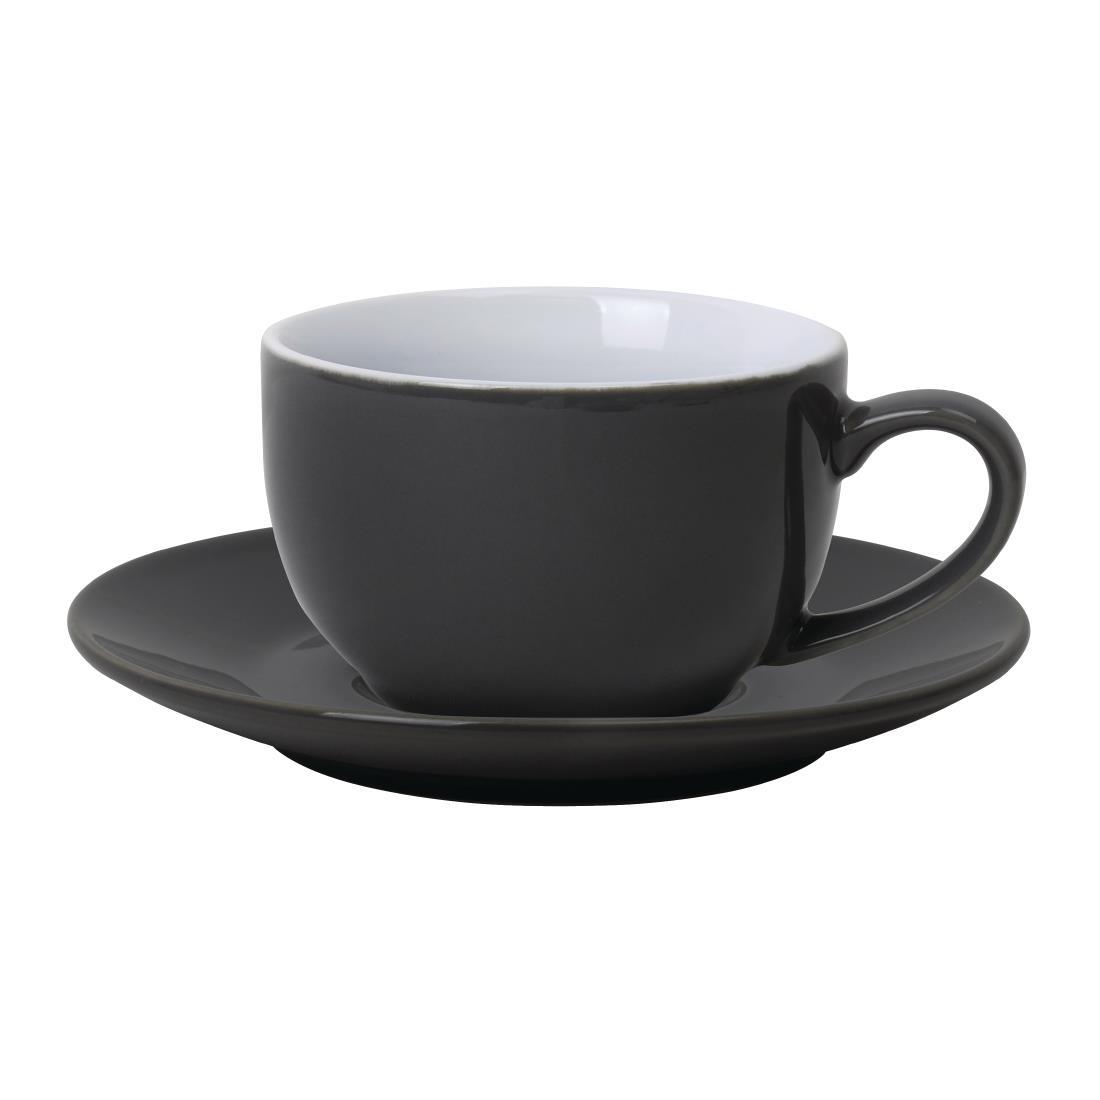 Olympia Cafe Coffee Cups Charcoal 228ml (Pack of 12) - GK075  - 2